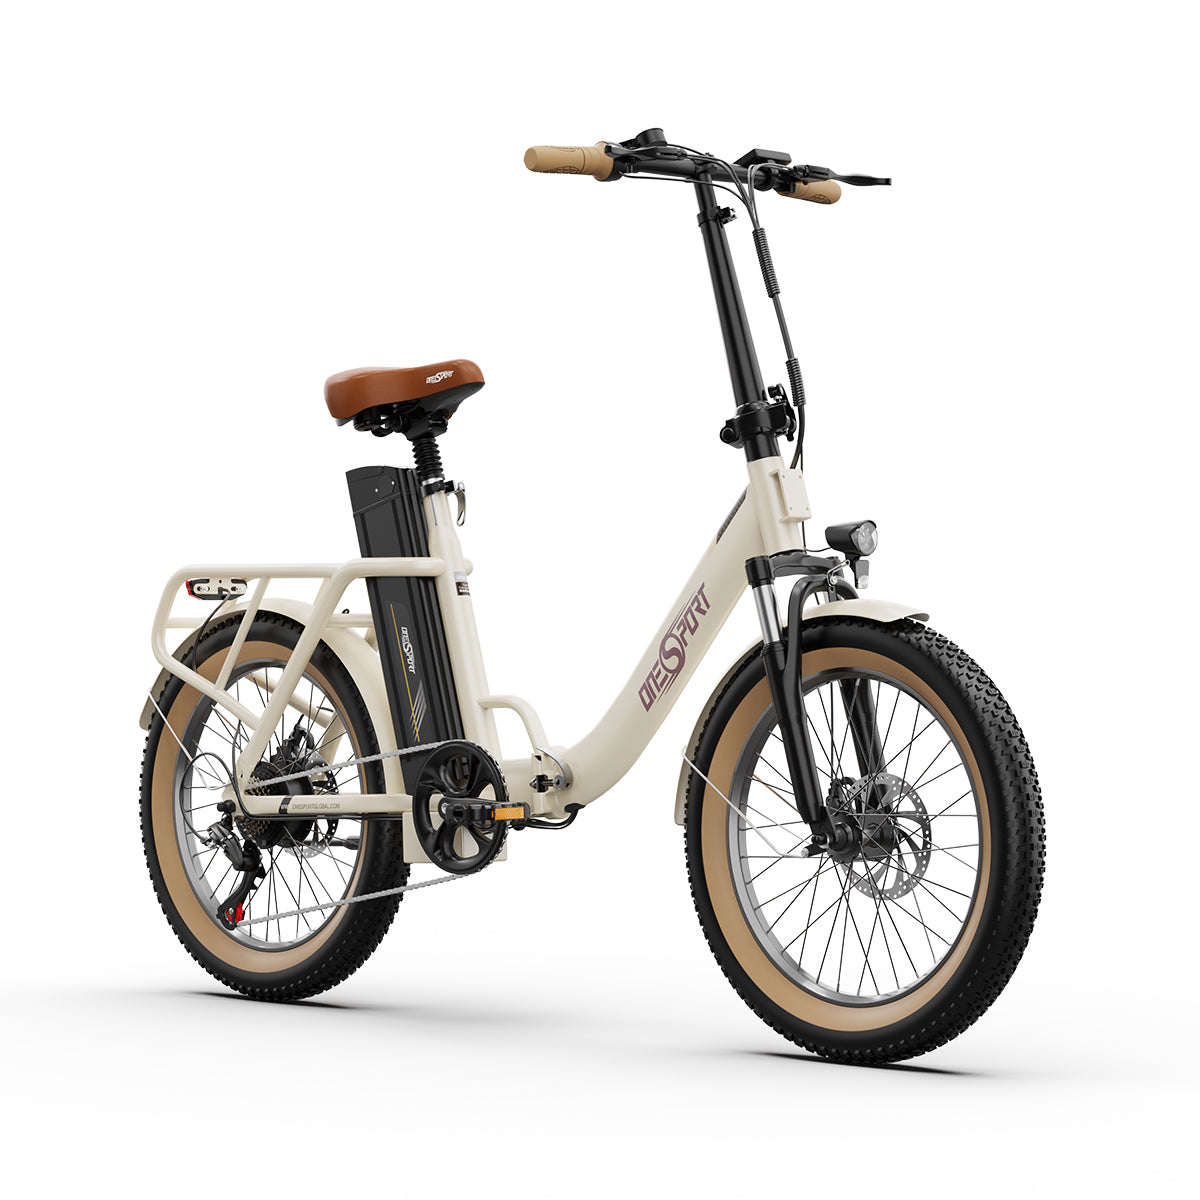 ONESPORT Folding Ebike 20 inch OT16-2 Electric Bike 250W Electric Bicycle with 15.6Ah Battery Adult City E-Bike For Commuting